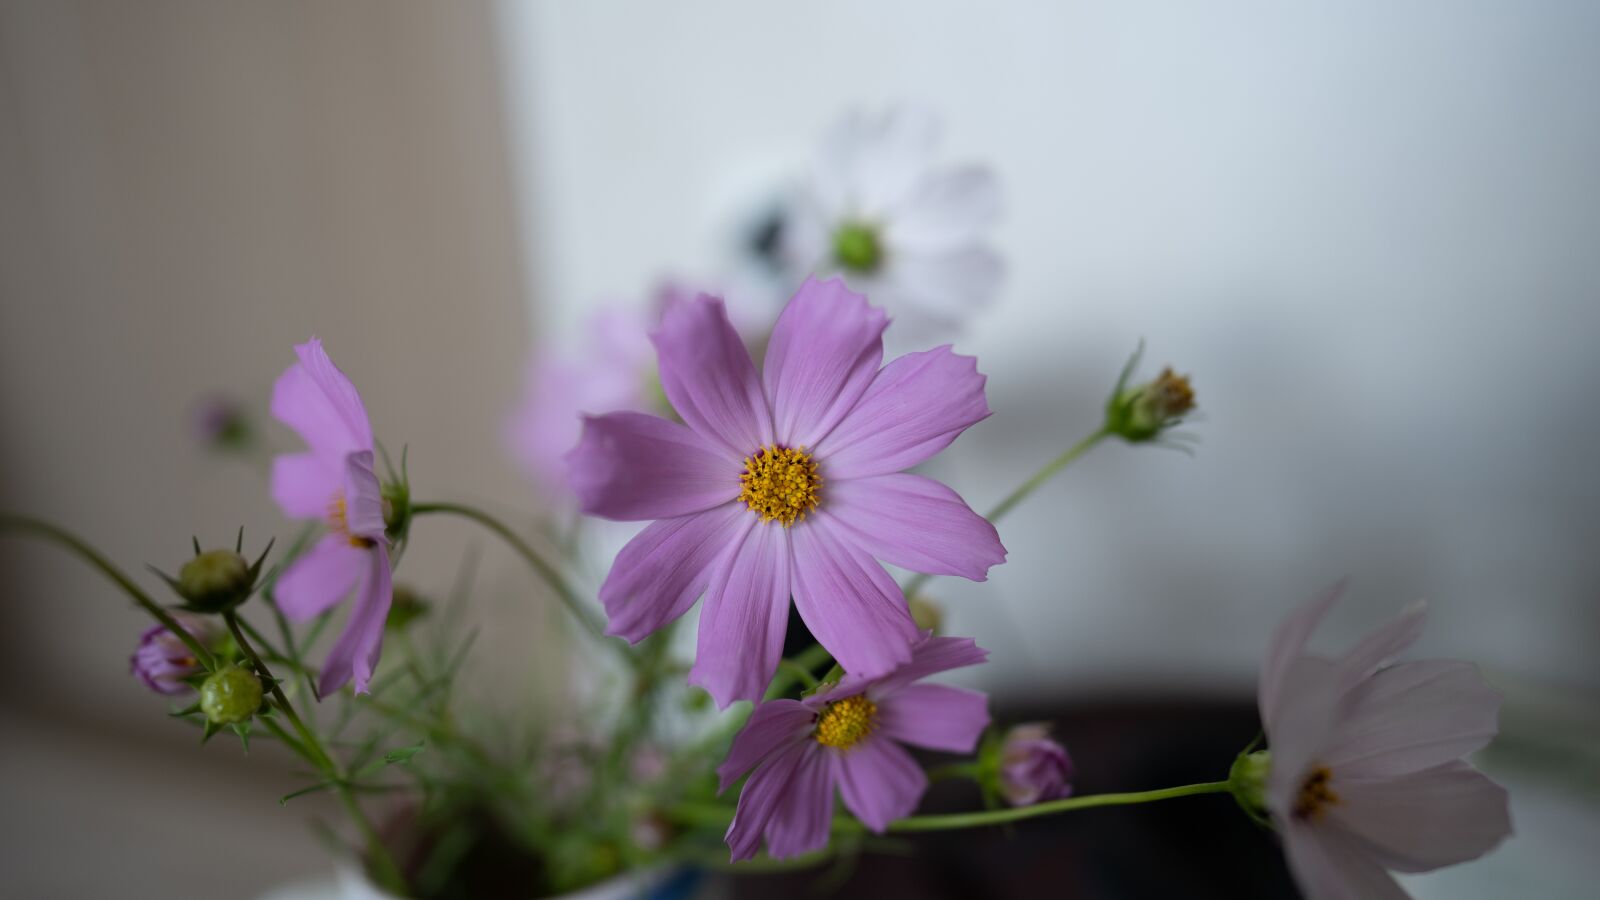 Sony a7 III sample photo. Cosmos, flowers, wallpaper photography